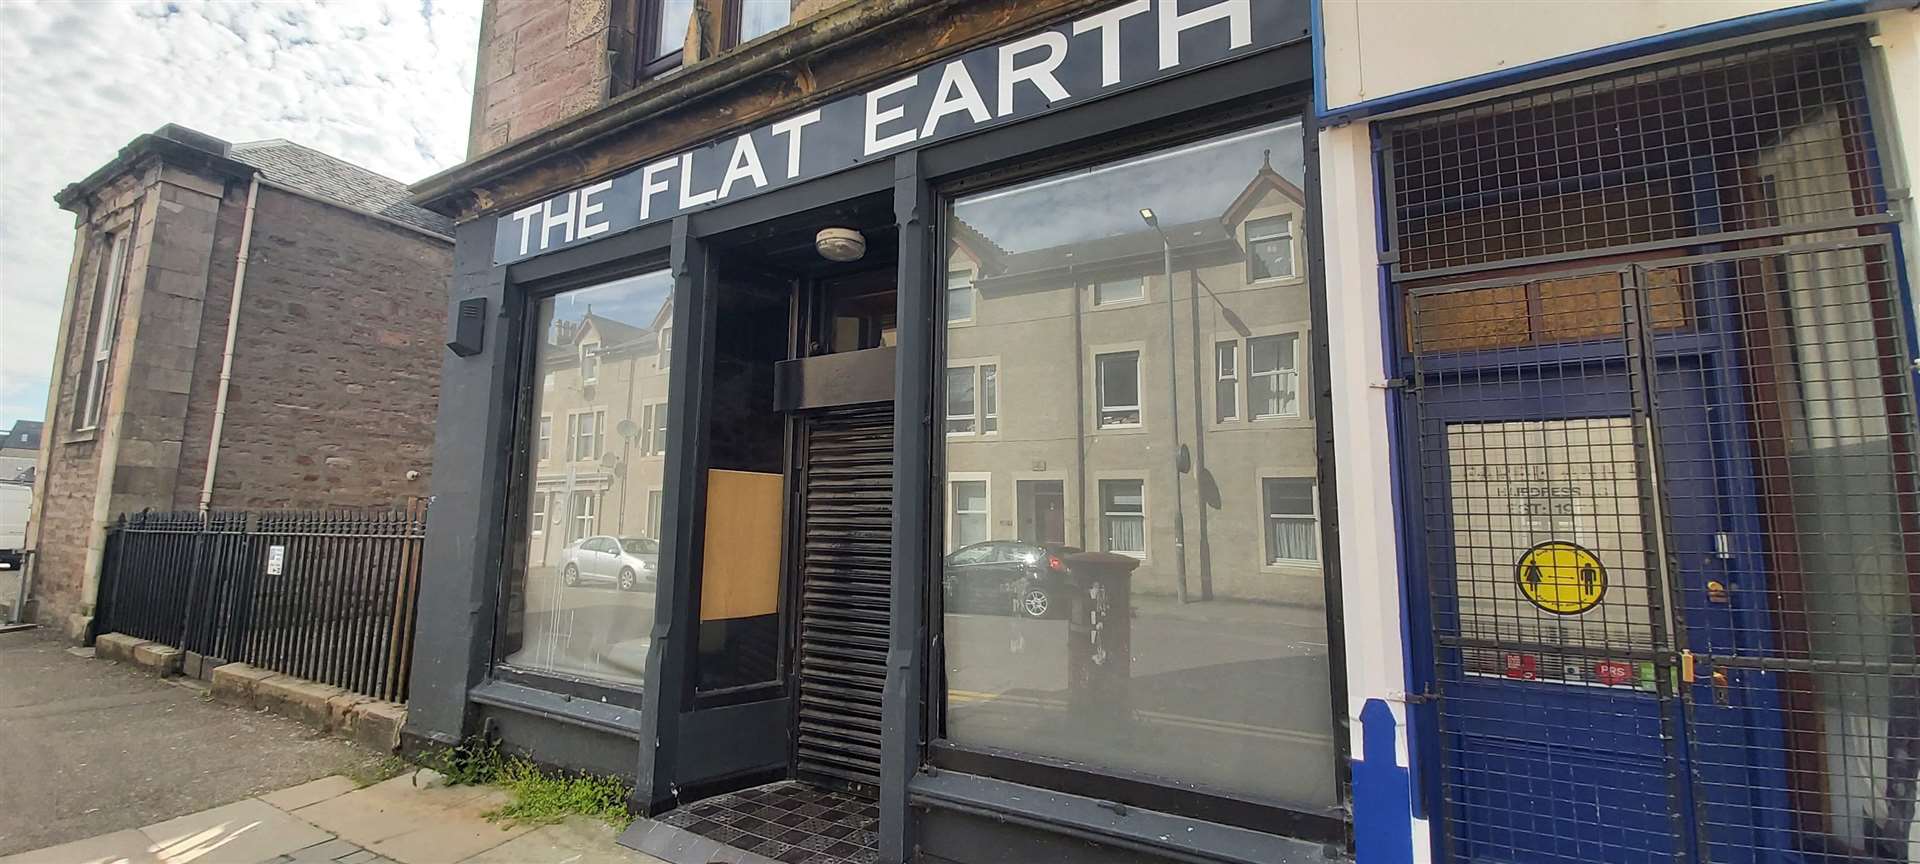 Flat Earth premises in Greig St, Inverness